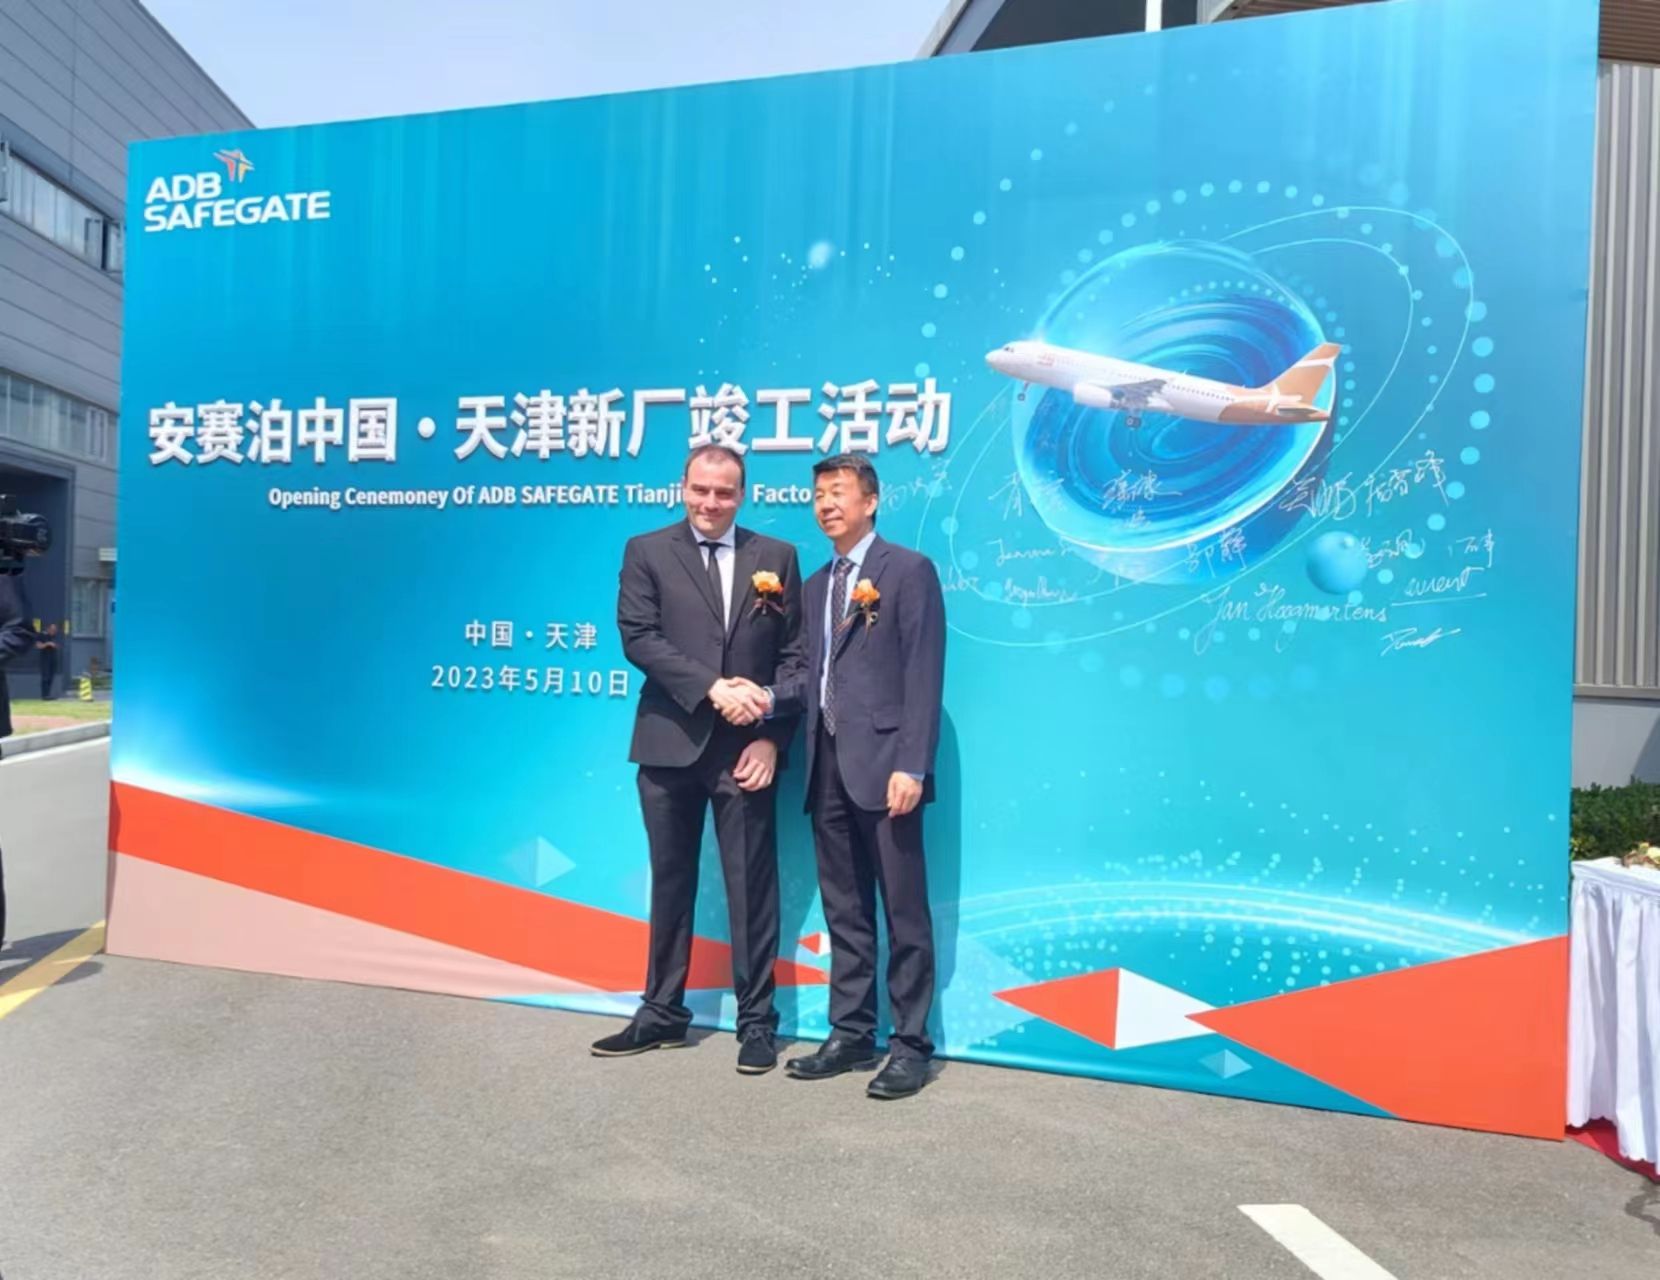 Elemaster Shanghai to the inauguration ceremony of the new site of ADB Safegate Tianjin